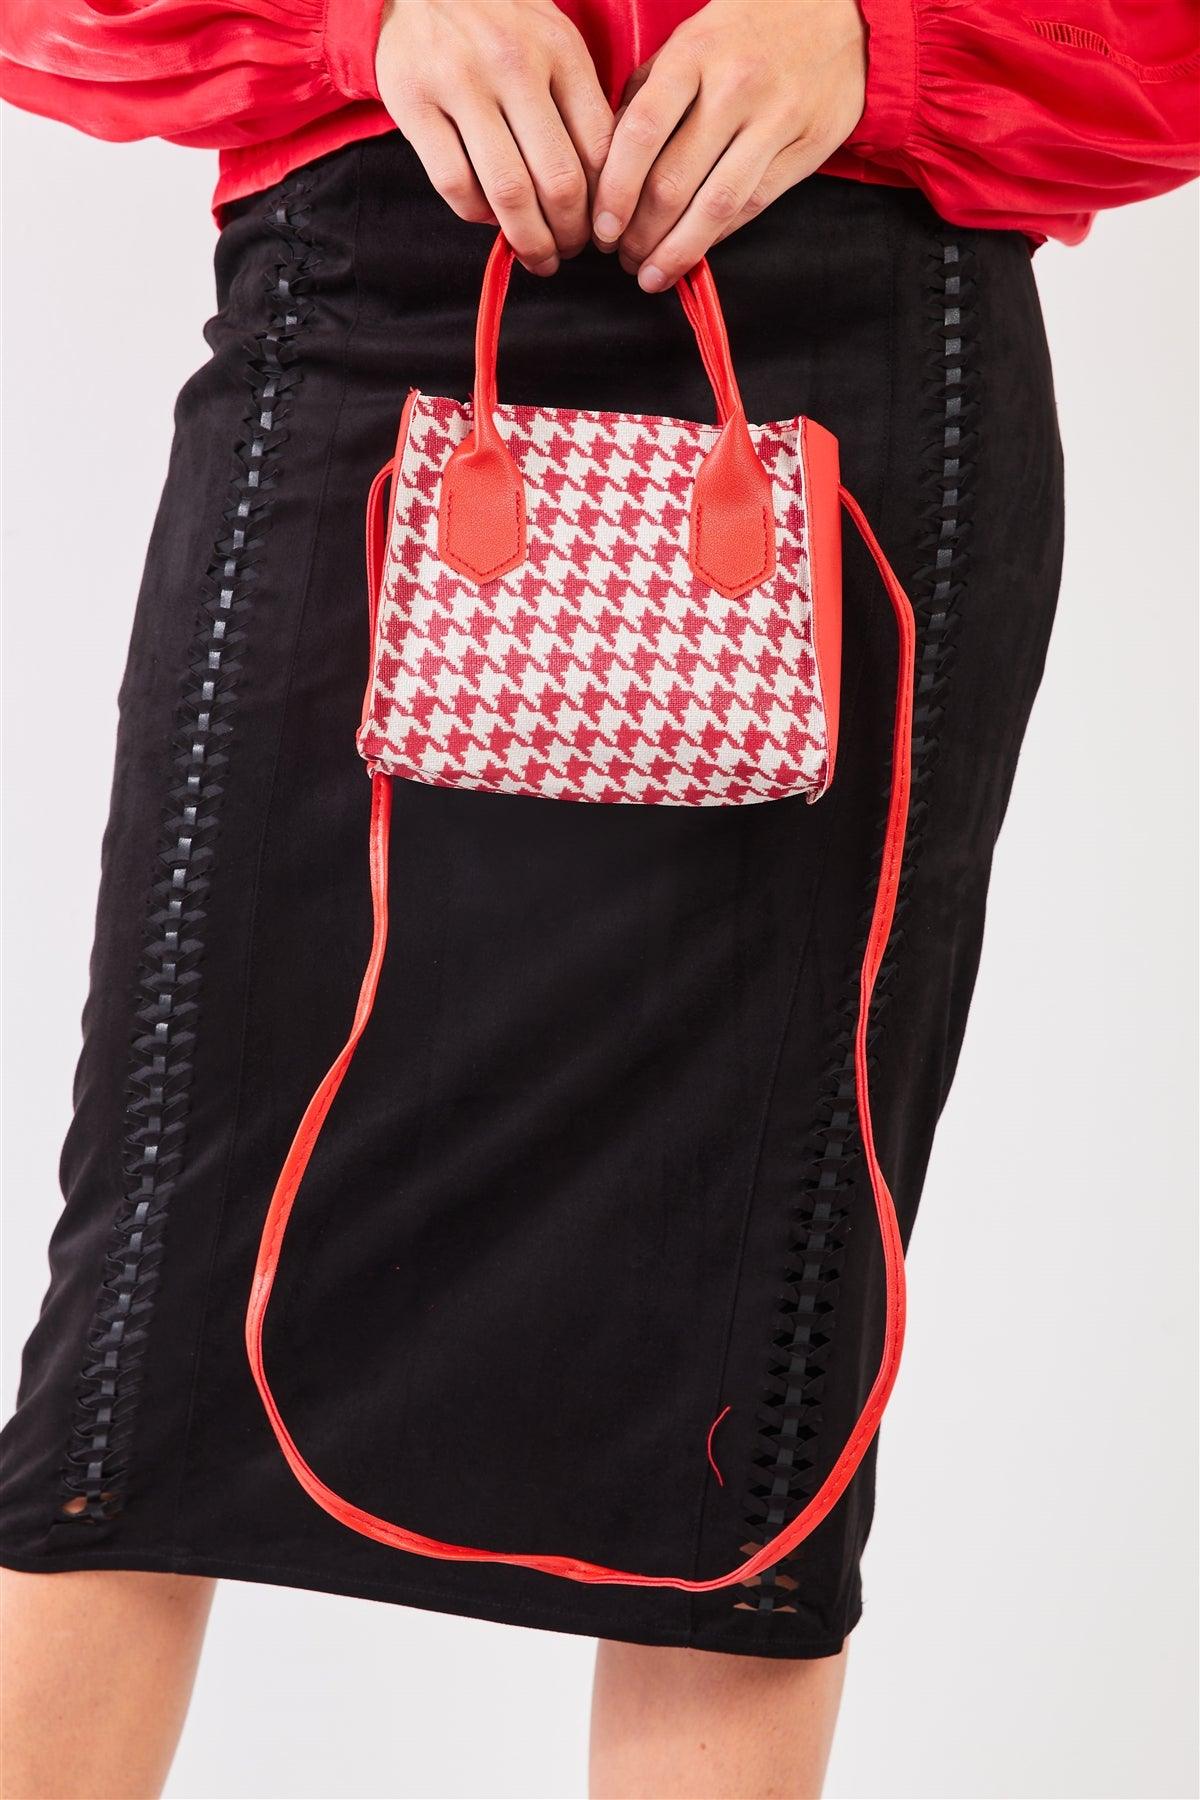 Red & White Houndstooth Print Two Handles Small Handbag /3 Bags